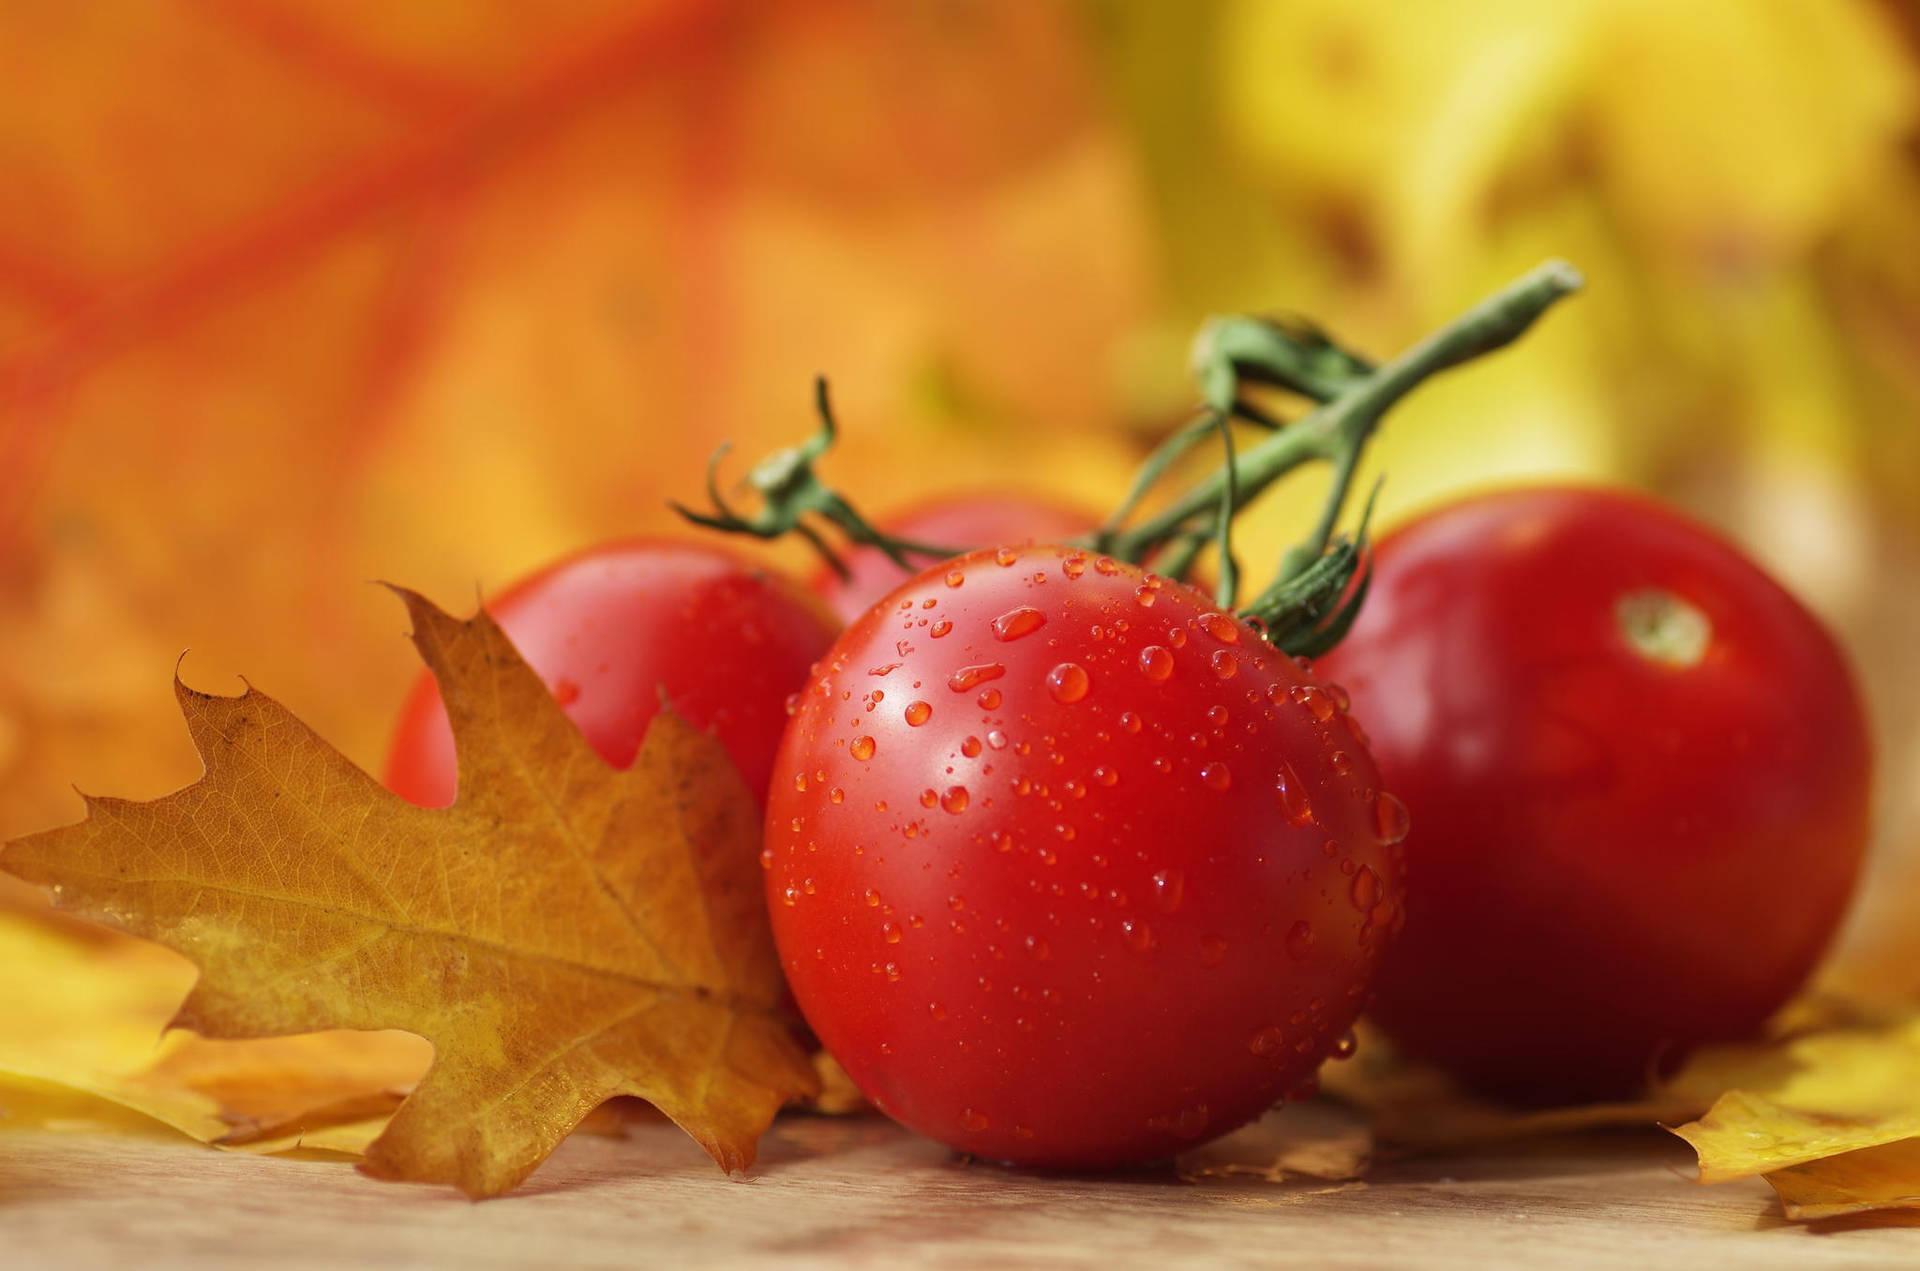 Autumn Red Tomato Fruit Bunches Wallpaper